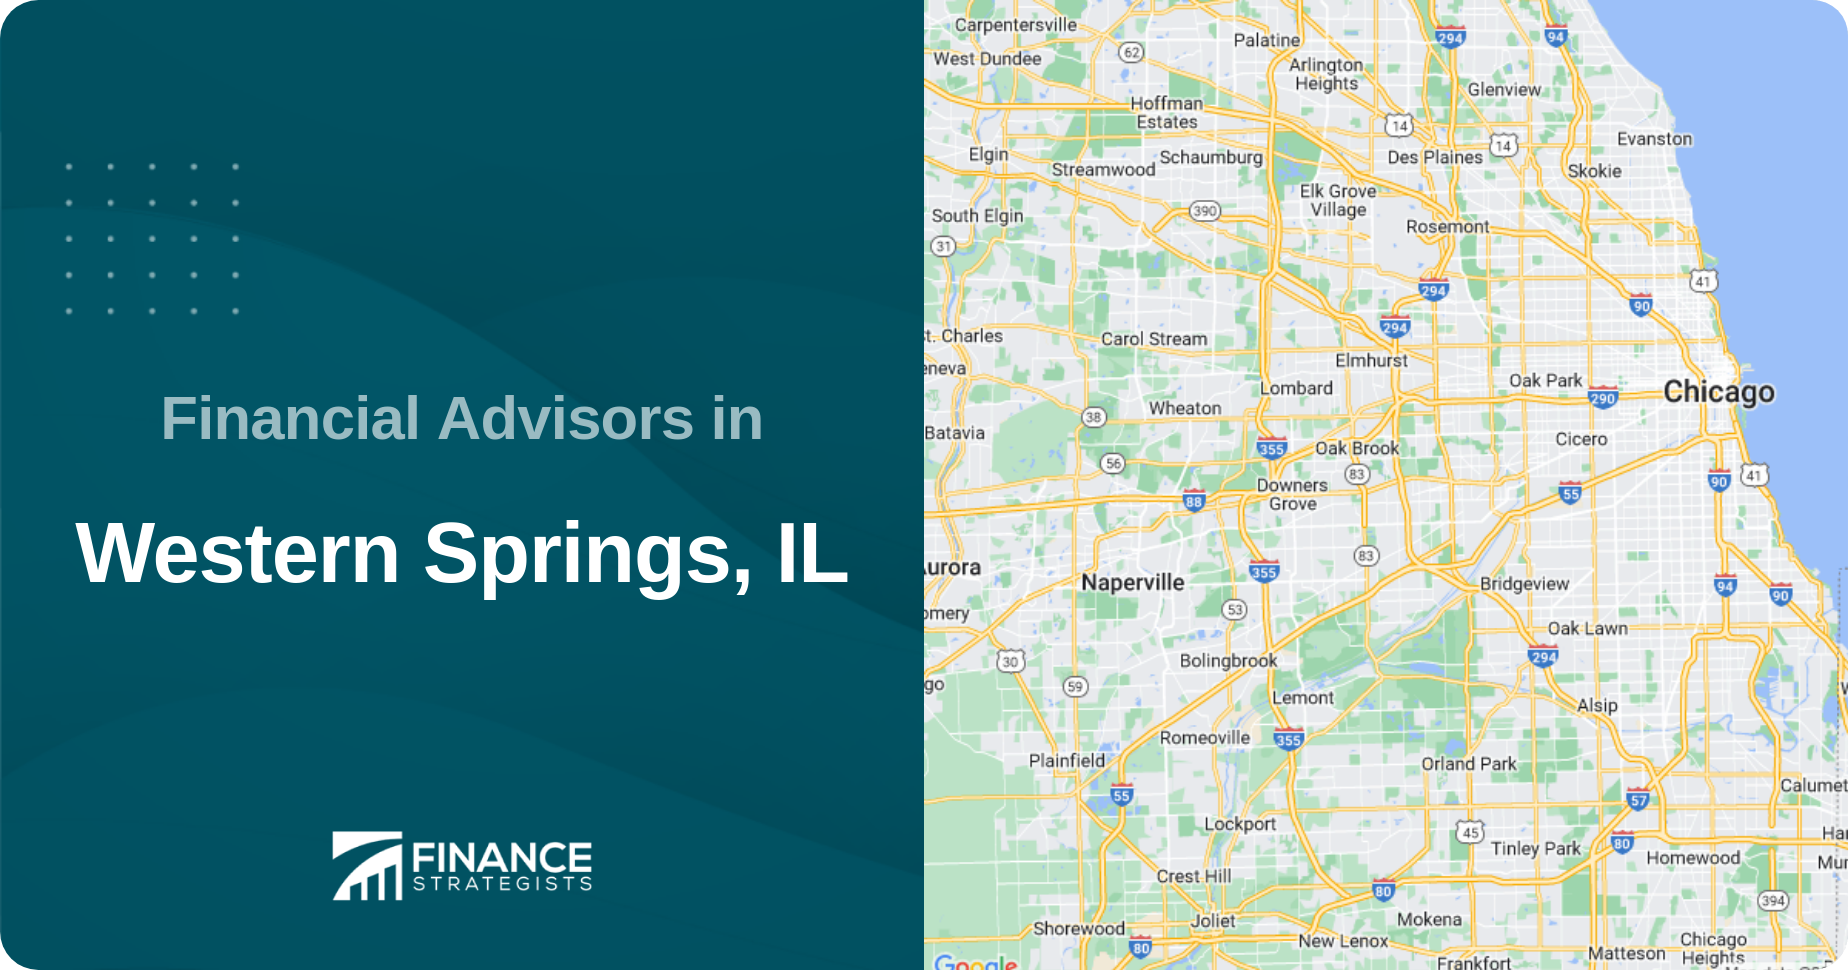 Financial Advisors in Western Springs, IL